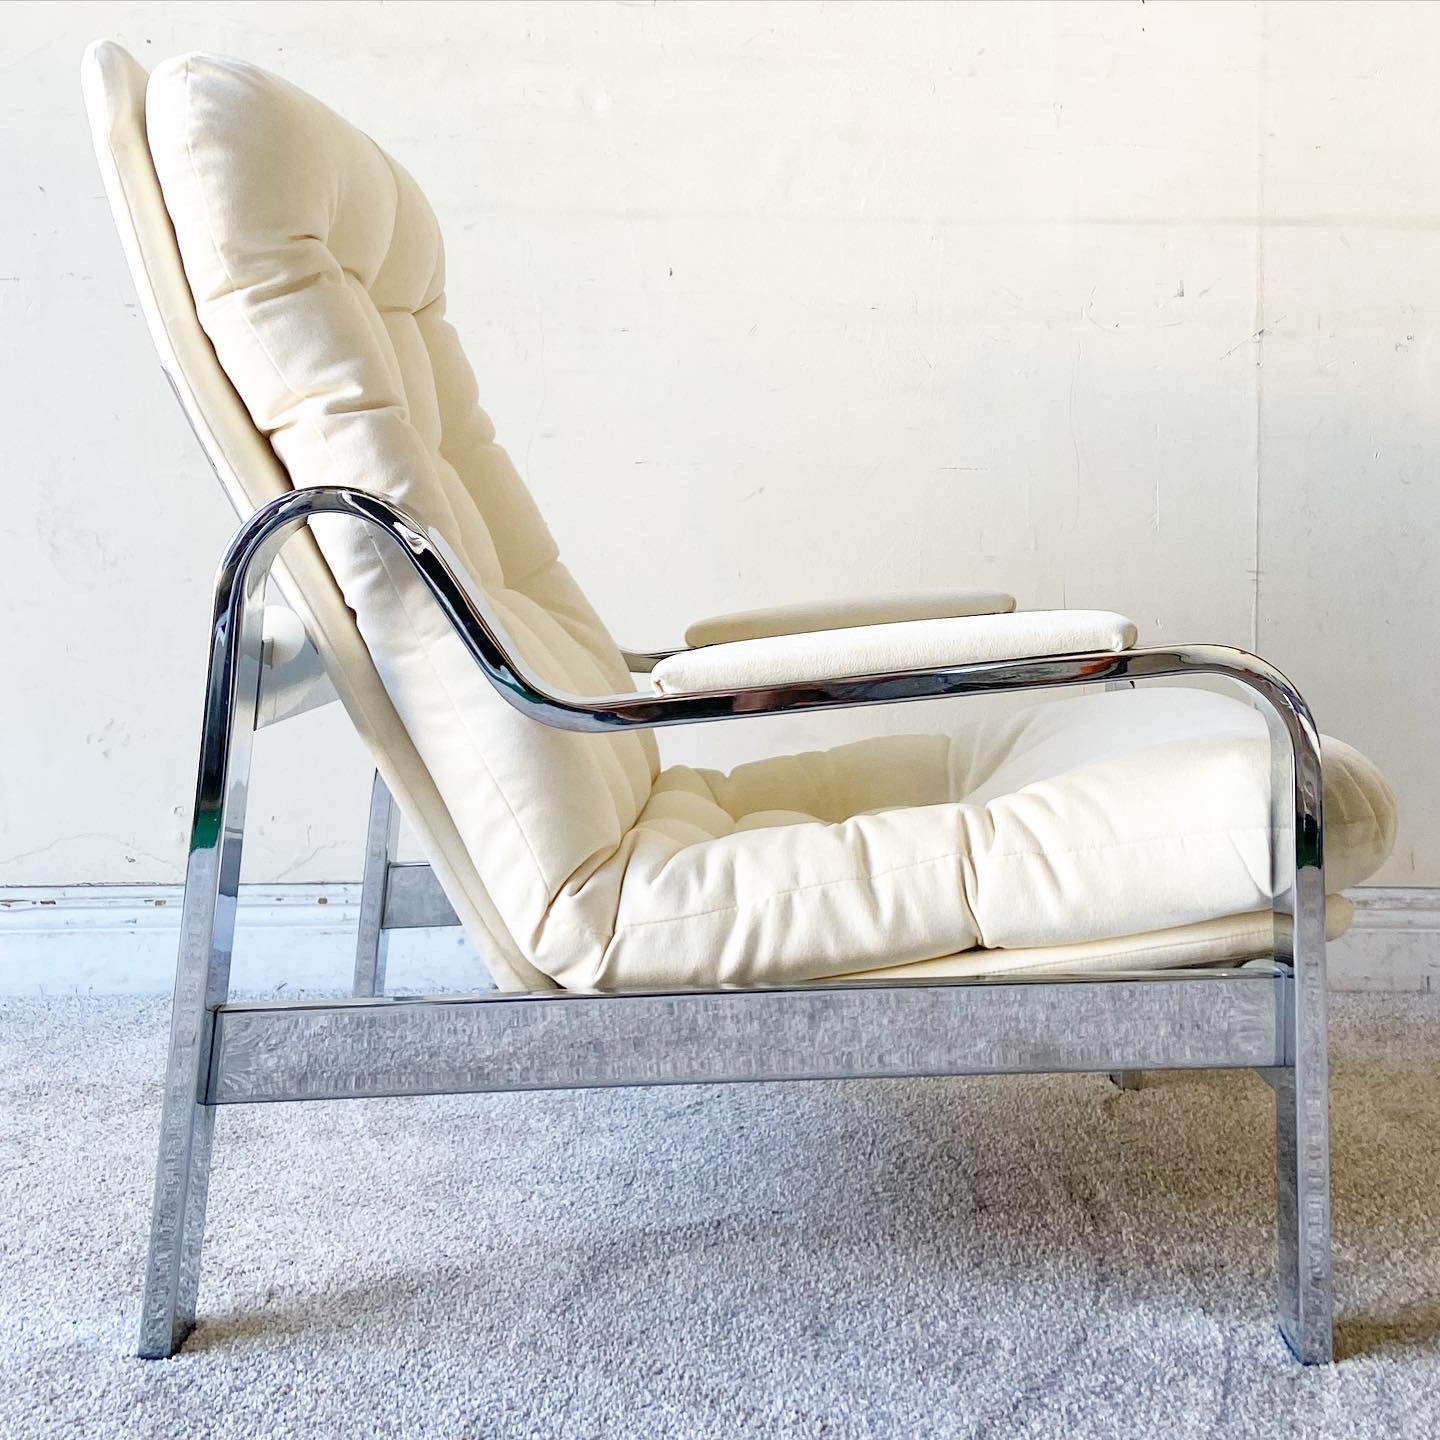 Late 20th Century Mid-Century Modern Chrome Reclining Lounge Chair with Ottoman by Selig